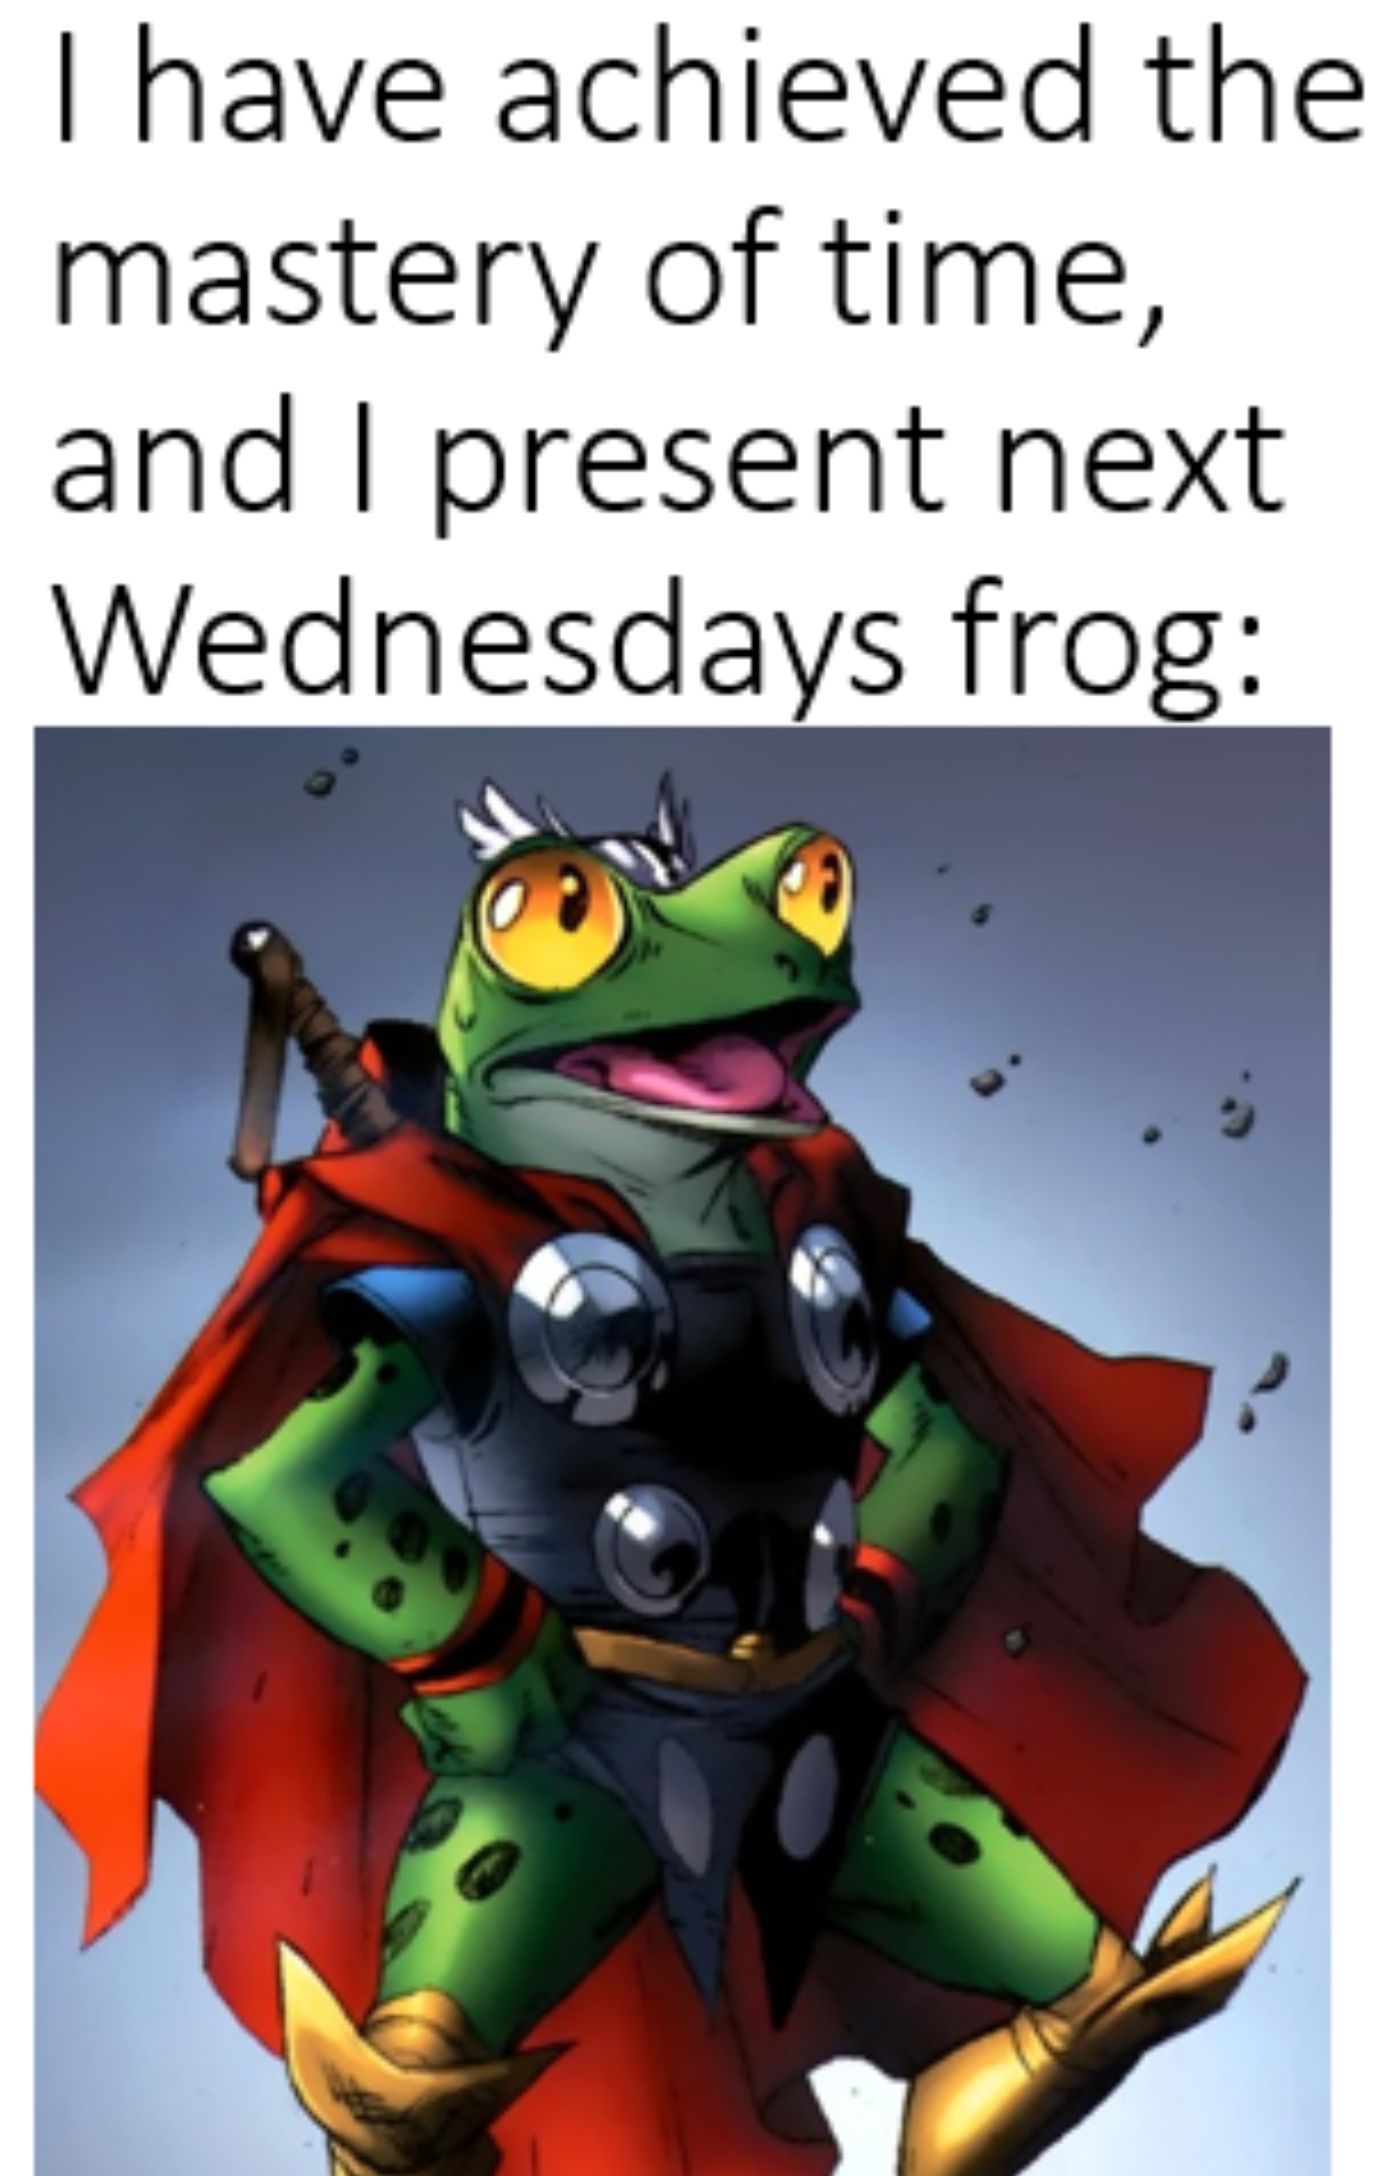 Meme featuring Throg standing with his arms akimbo